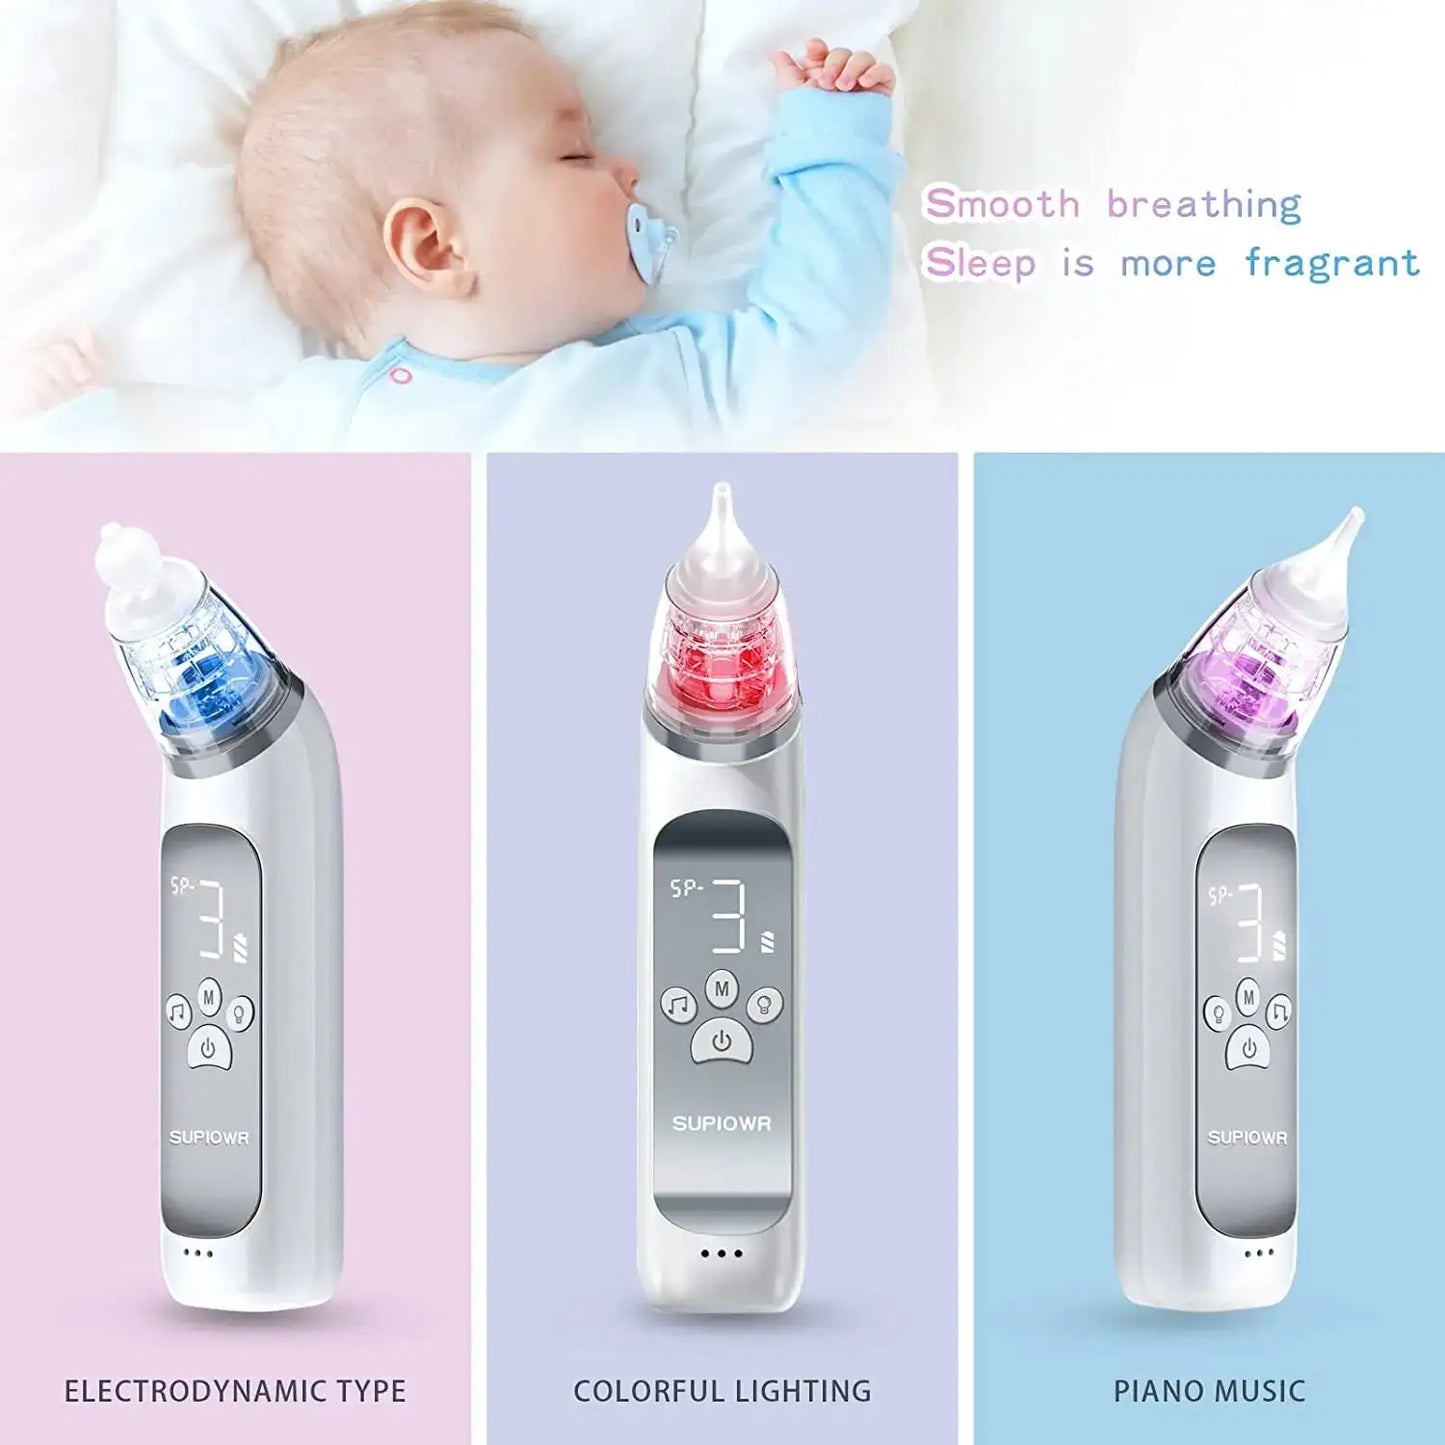 SnuzeVolt: The Gentle Solution for Baby Congestion